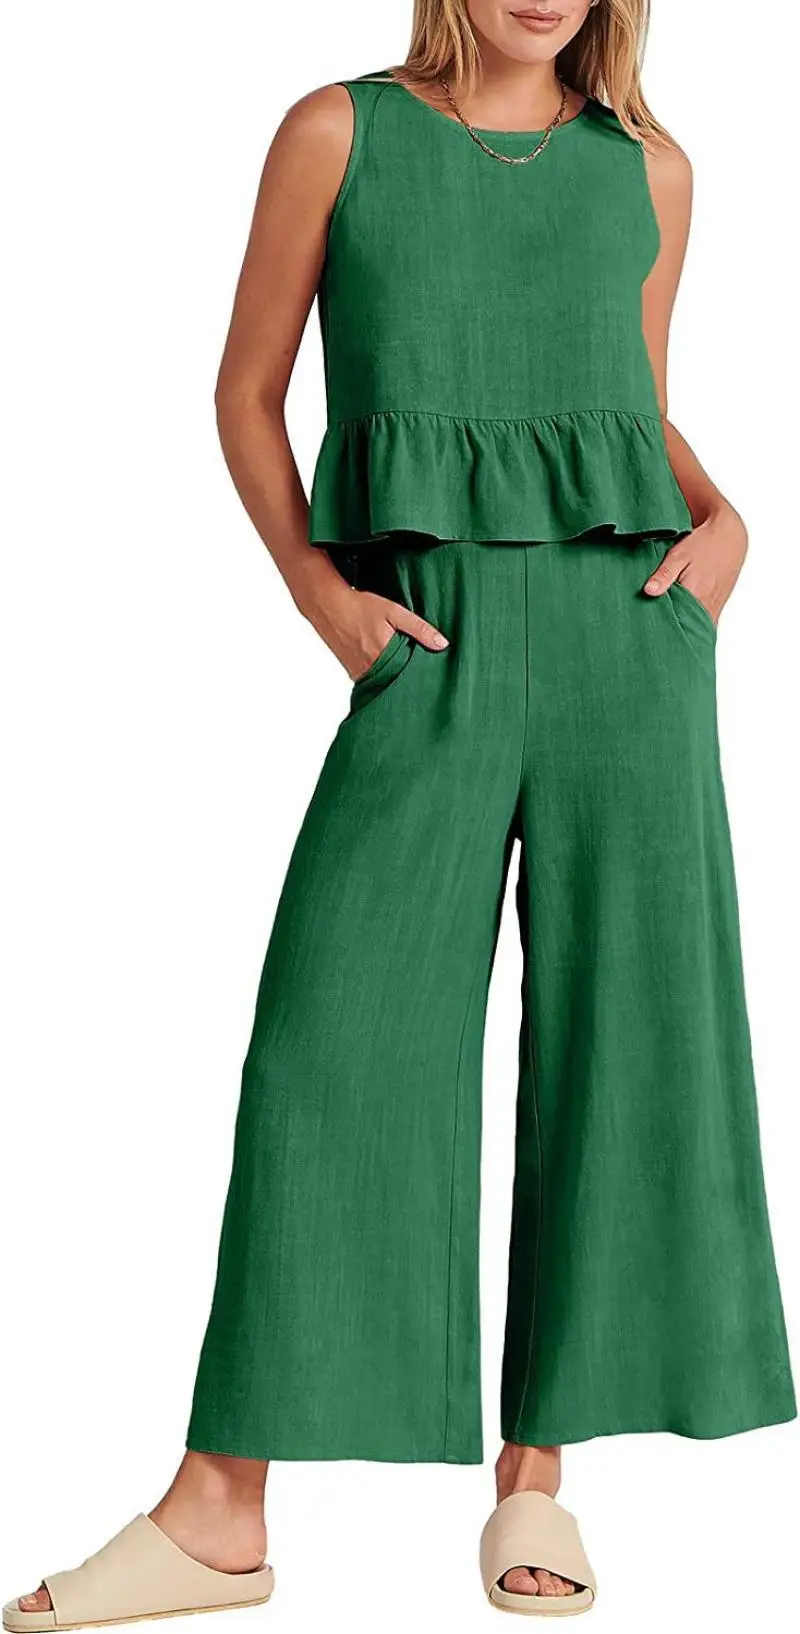 Women Summer Casual Linen 2 Piece Pants Set Solid Elegant Two Piece Suit Sleeveless Wide Leg Outfit 2023 New In Matcing Set -S5a4cf1455dfc4212847f84f8cddf0bef6